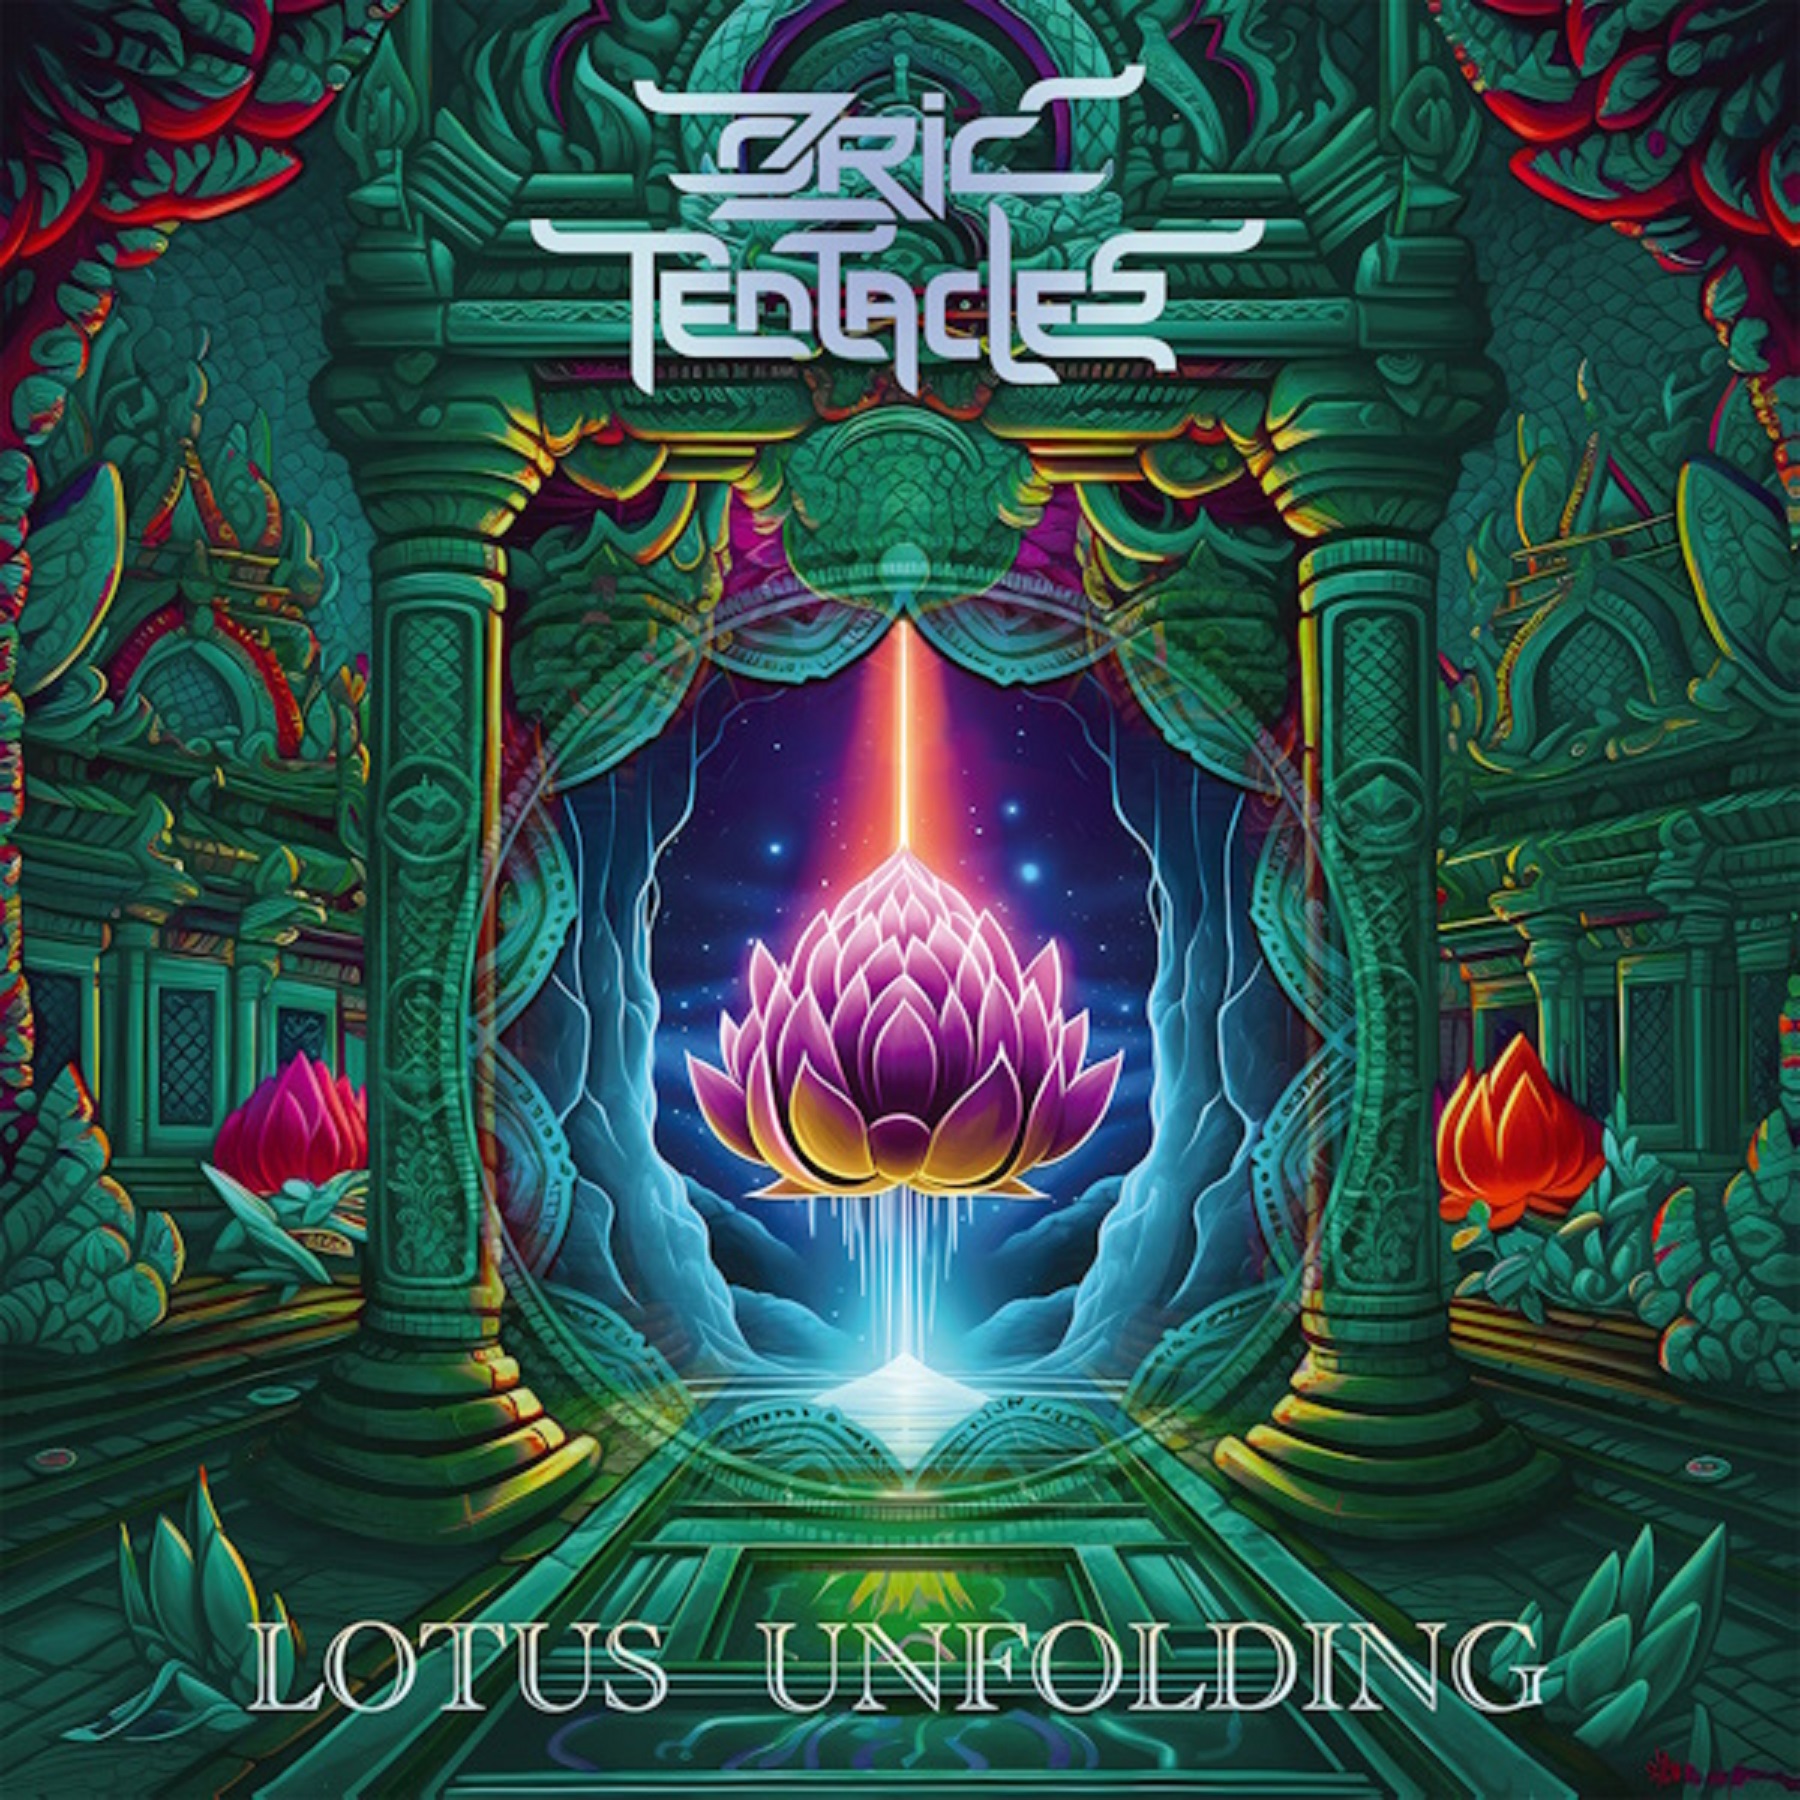 Ozric Tentacles Reveal “Deep Blue Shade” Second Single From “Lotus Unfolding” Album Out October 20th Via KScope